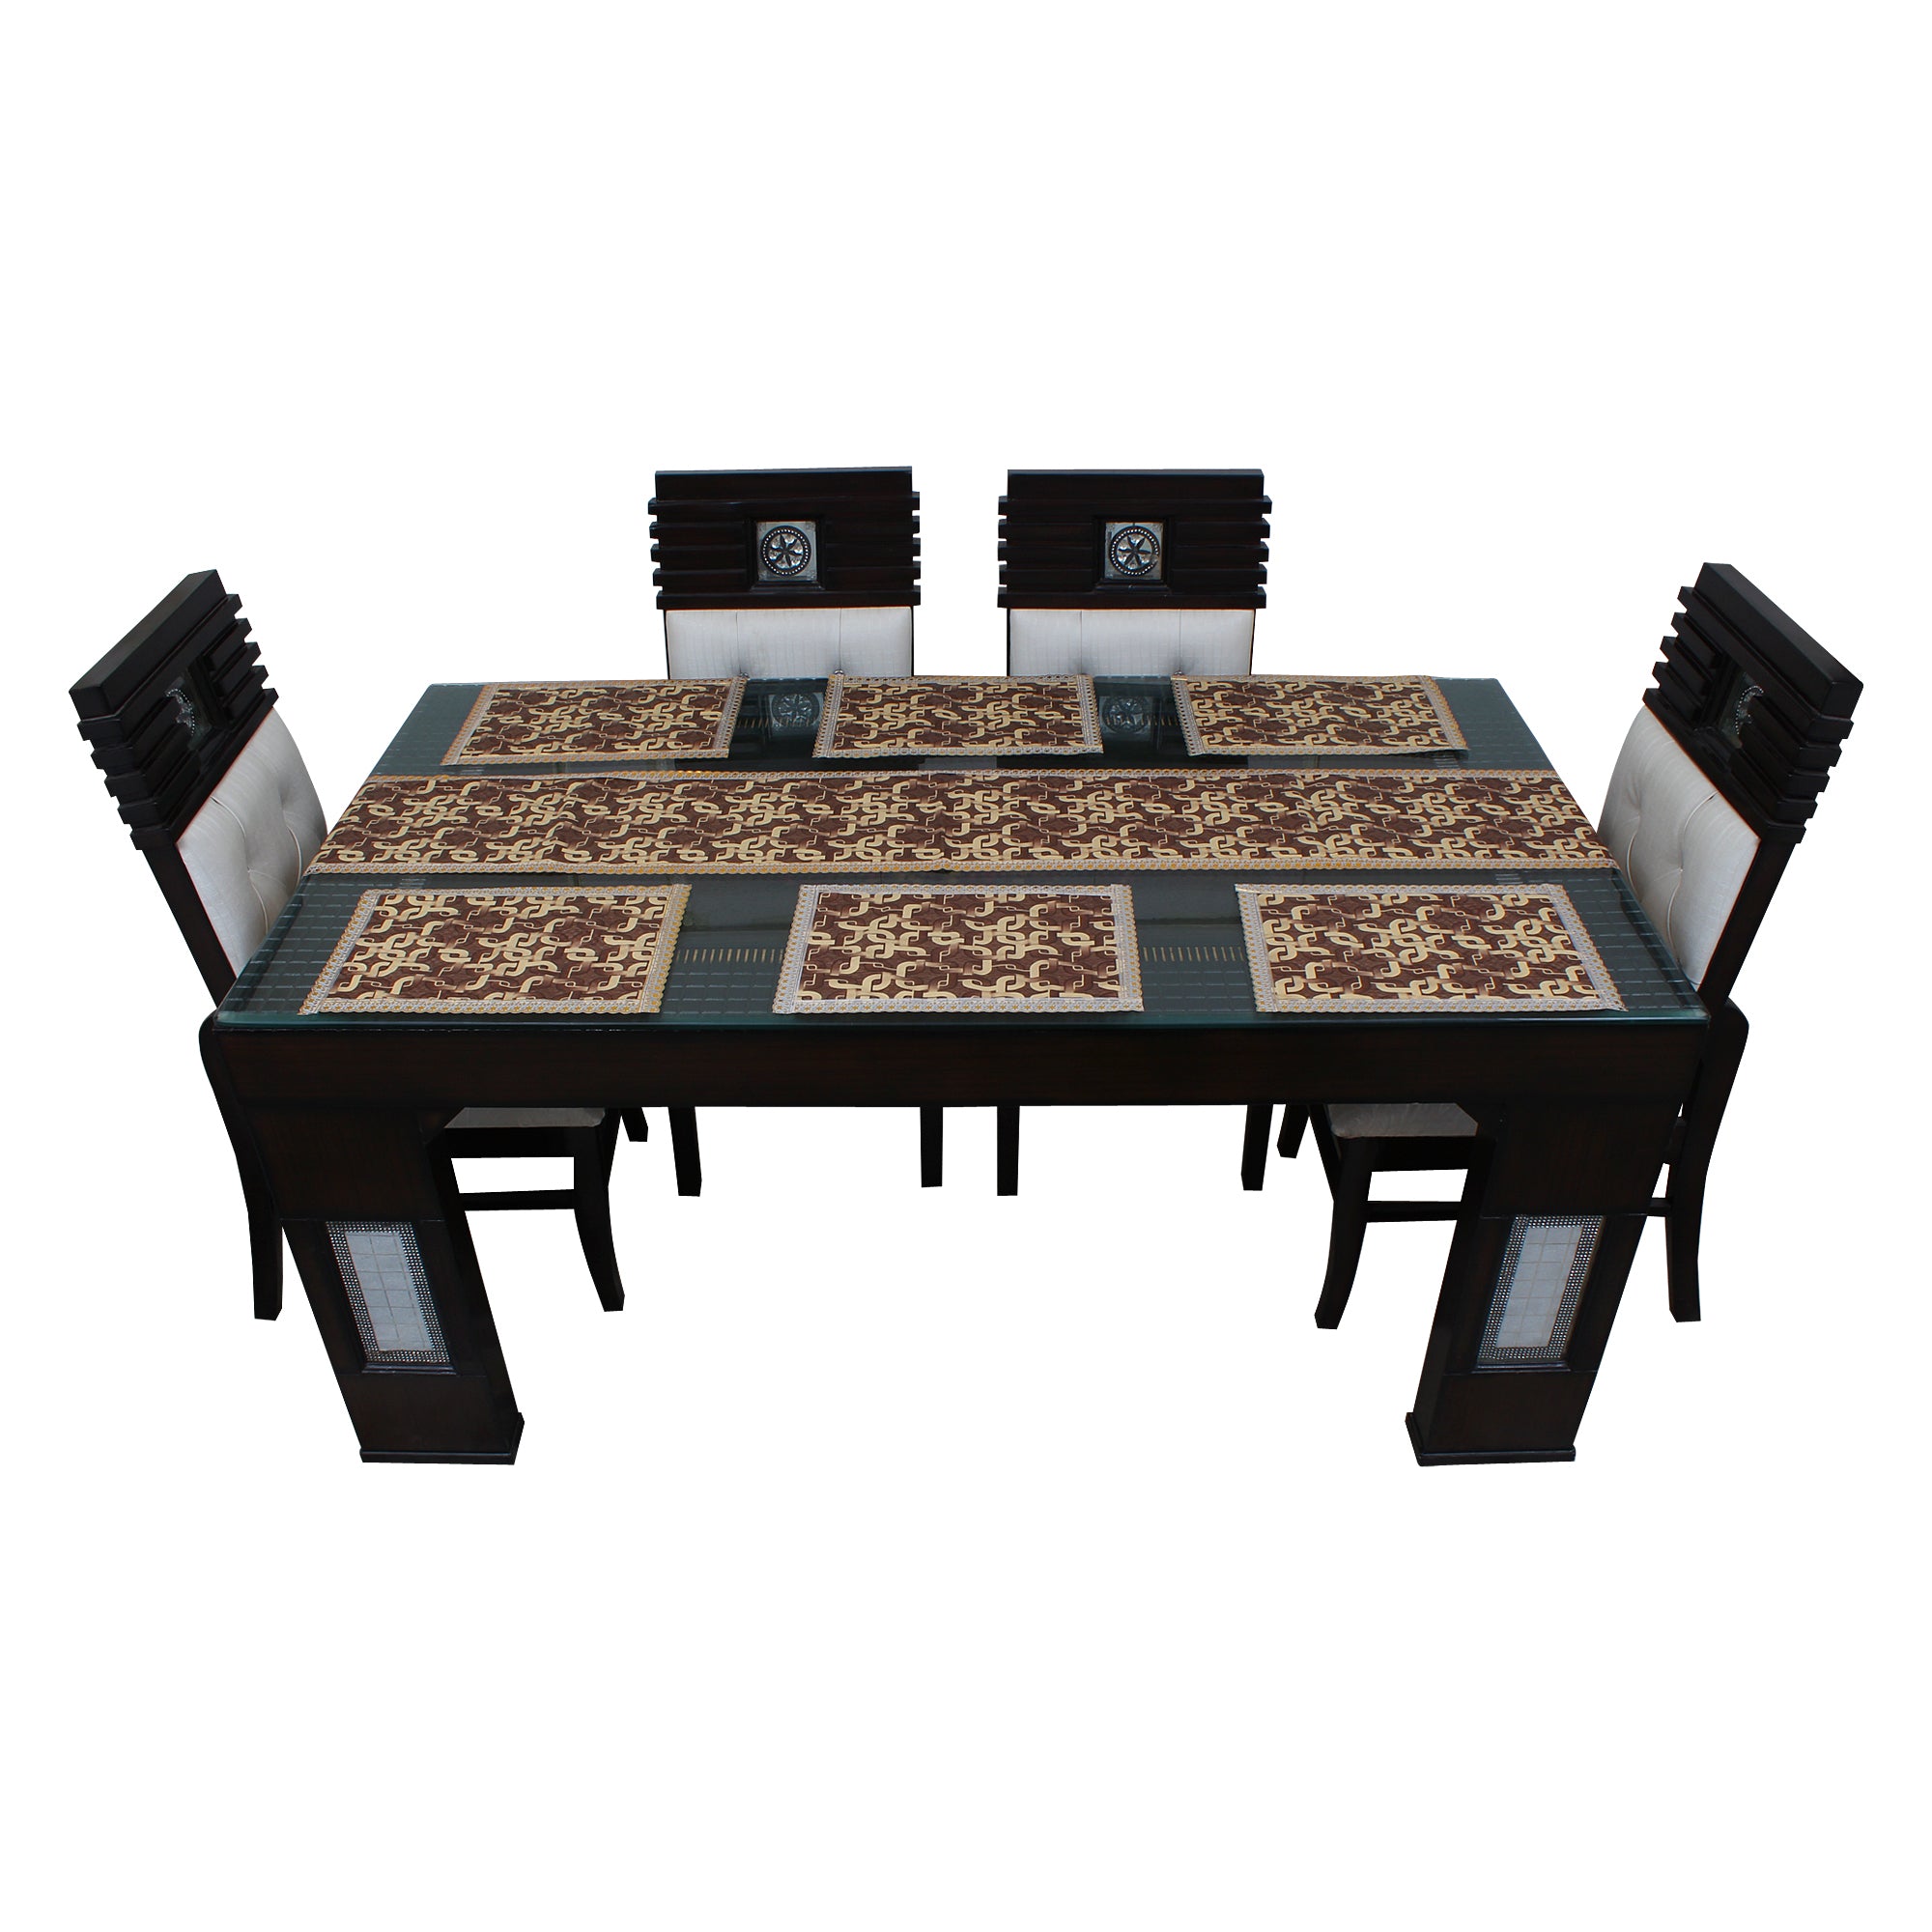 Waterproof & Dustproof Dining Table Runner With 6 Placemats, SA39 - Dream Care Furnishings Private Limited